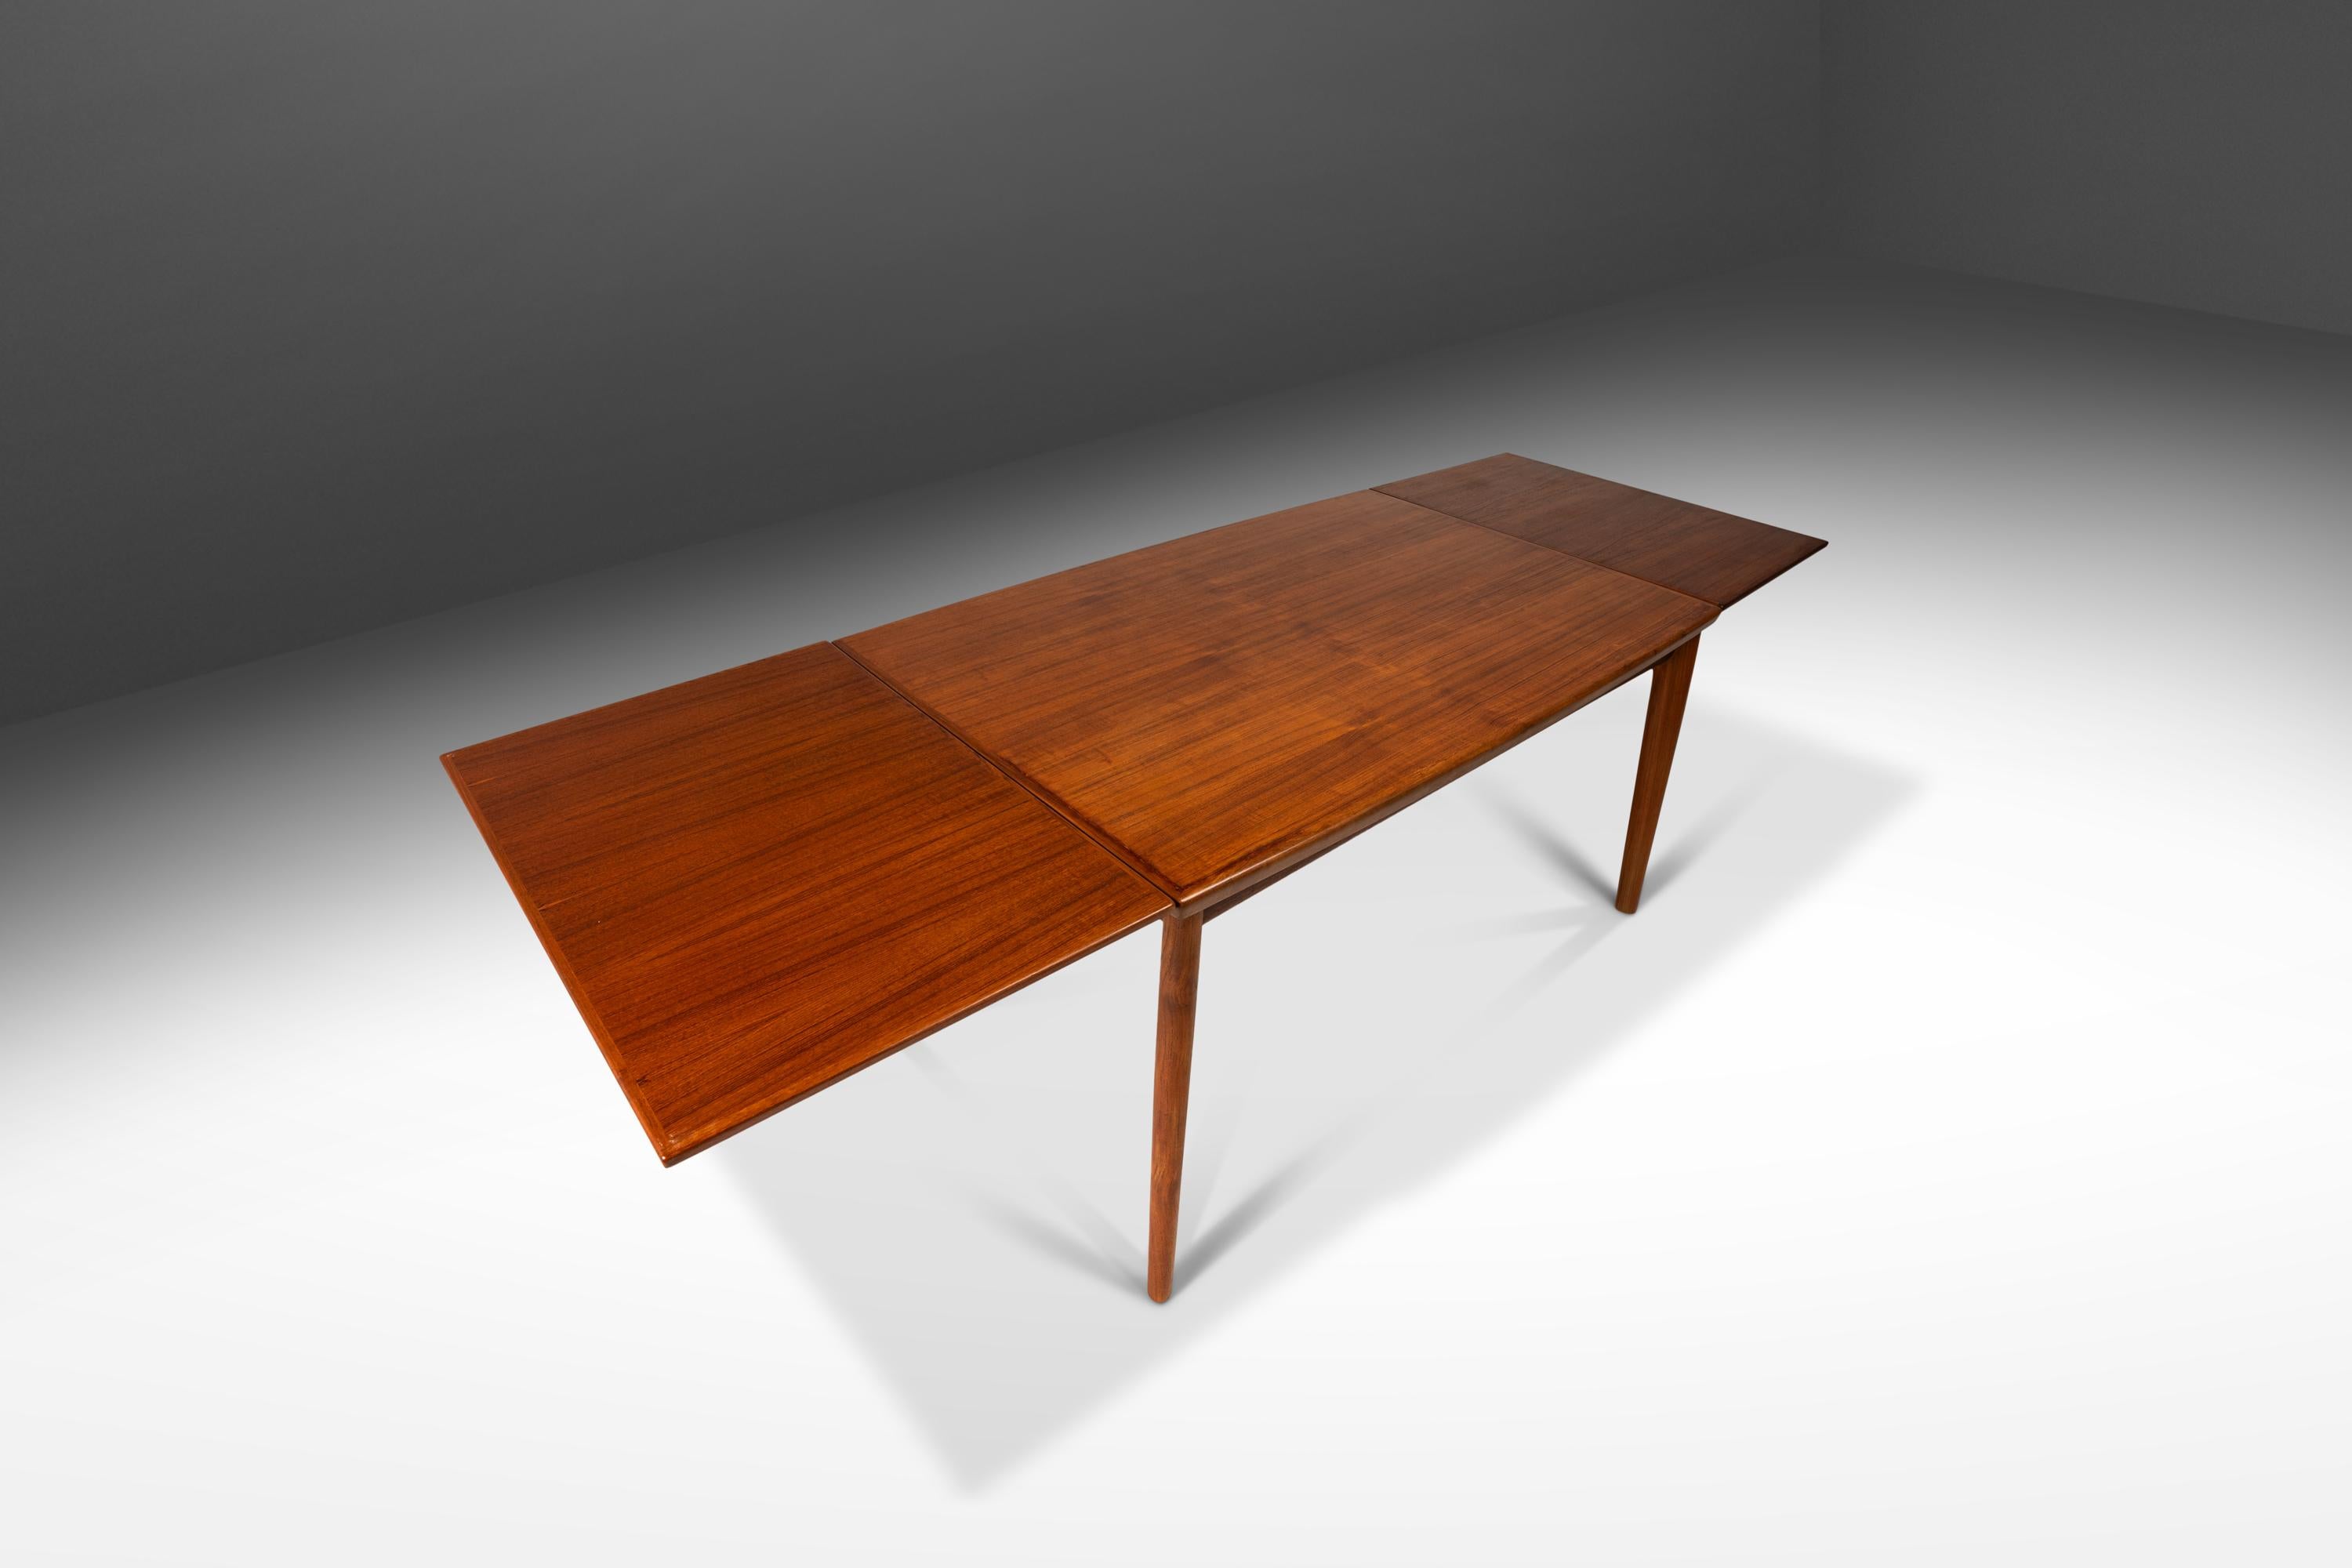 Wood Danish Modern Expansion Dining Table in Teak w/ Stow-in-Table Leaves, c. 1960s For Sale